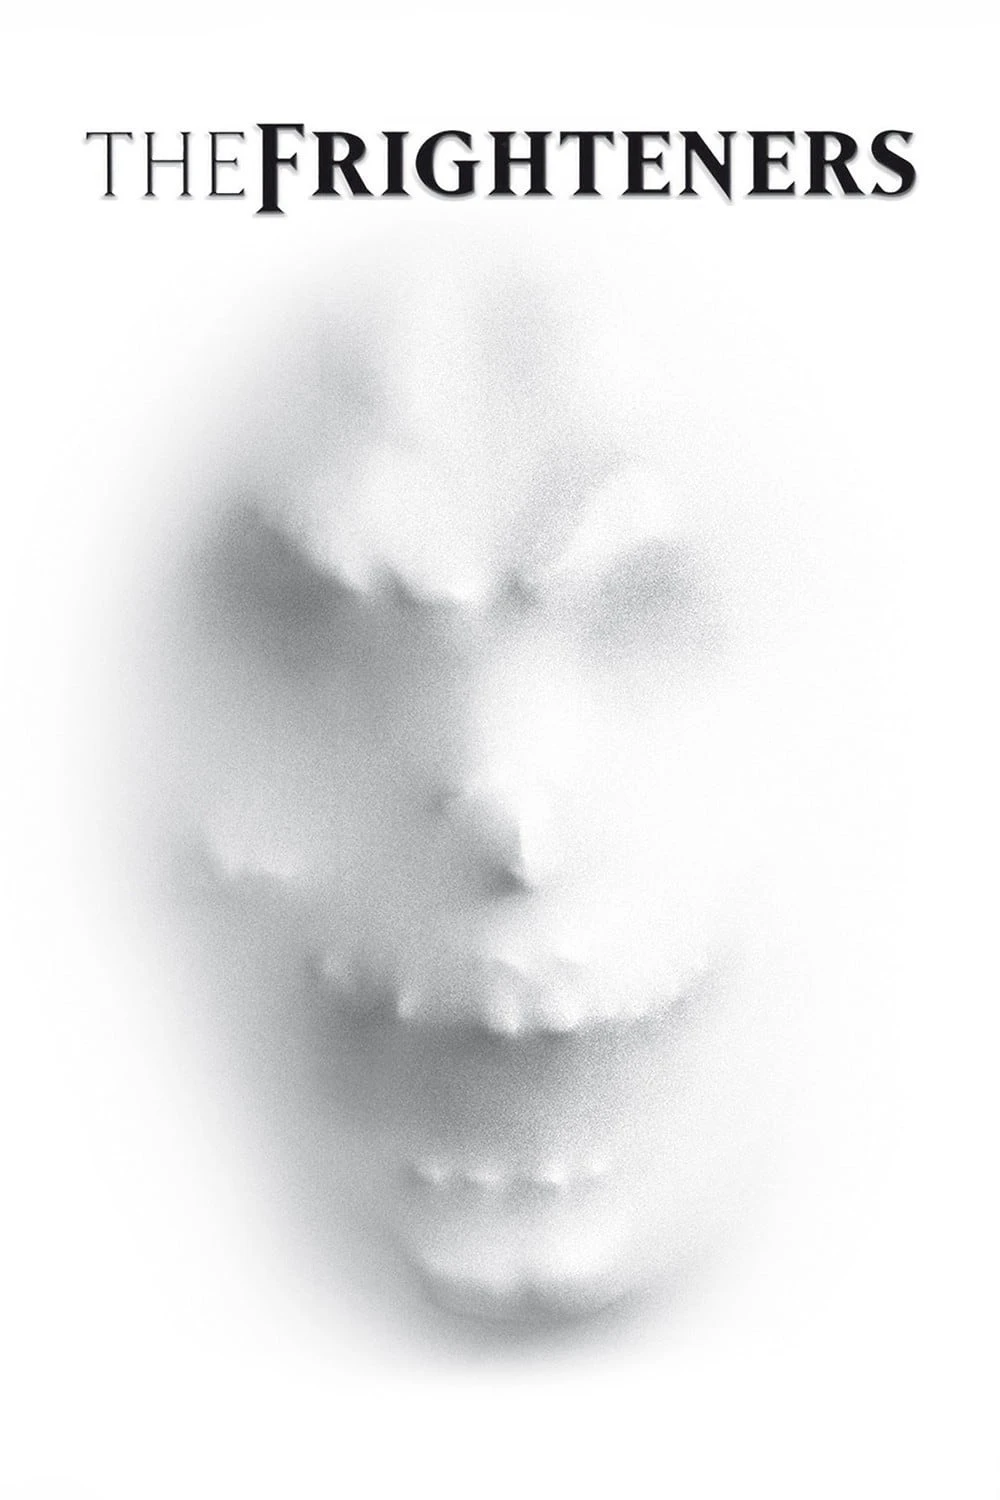 The Frighteners | The Frighteners (1996)